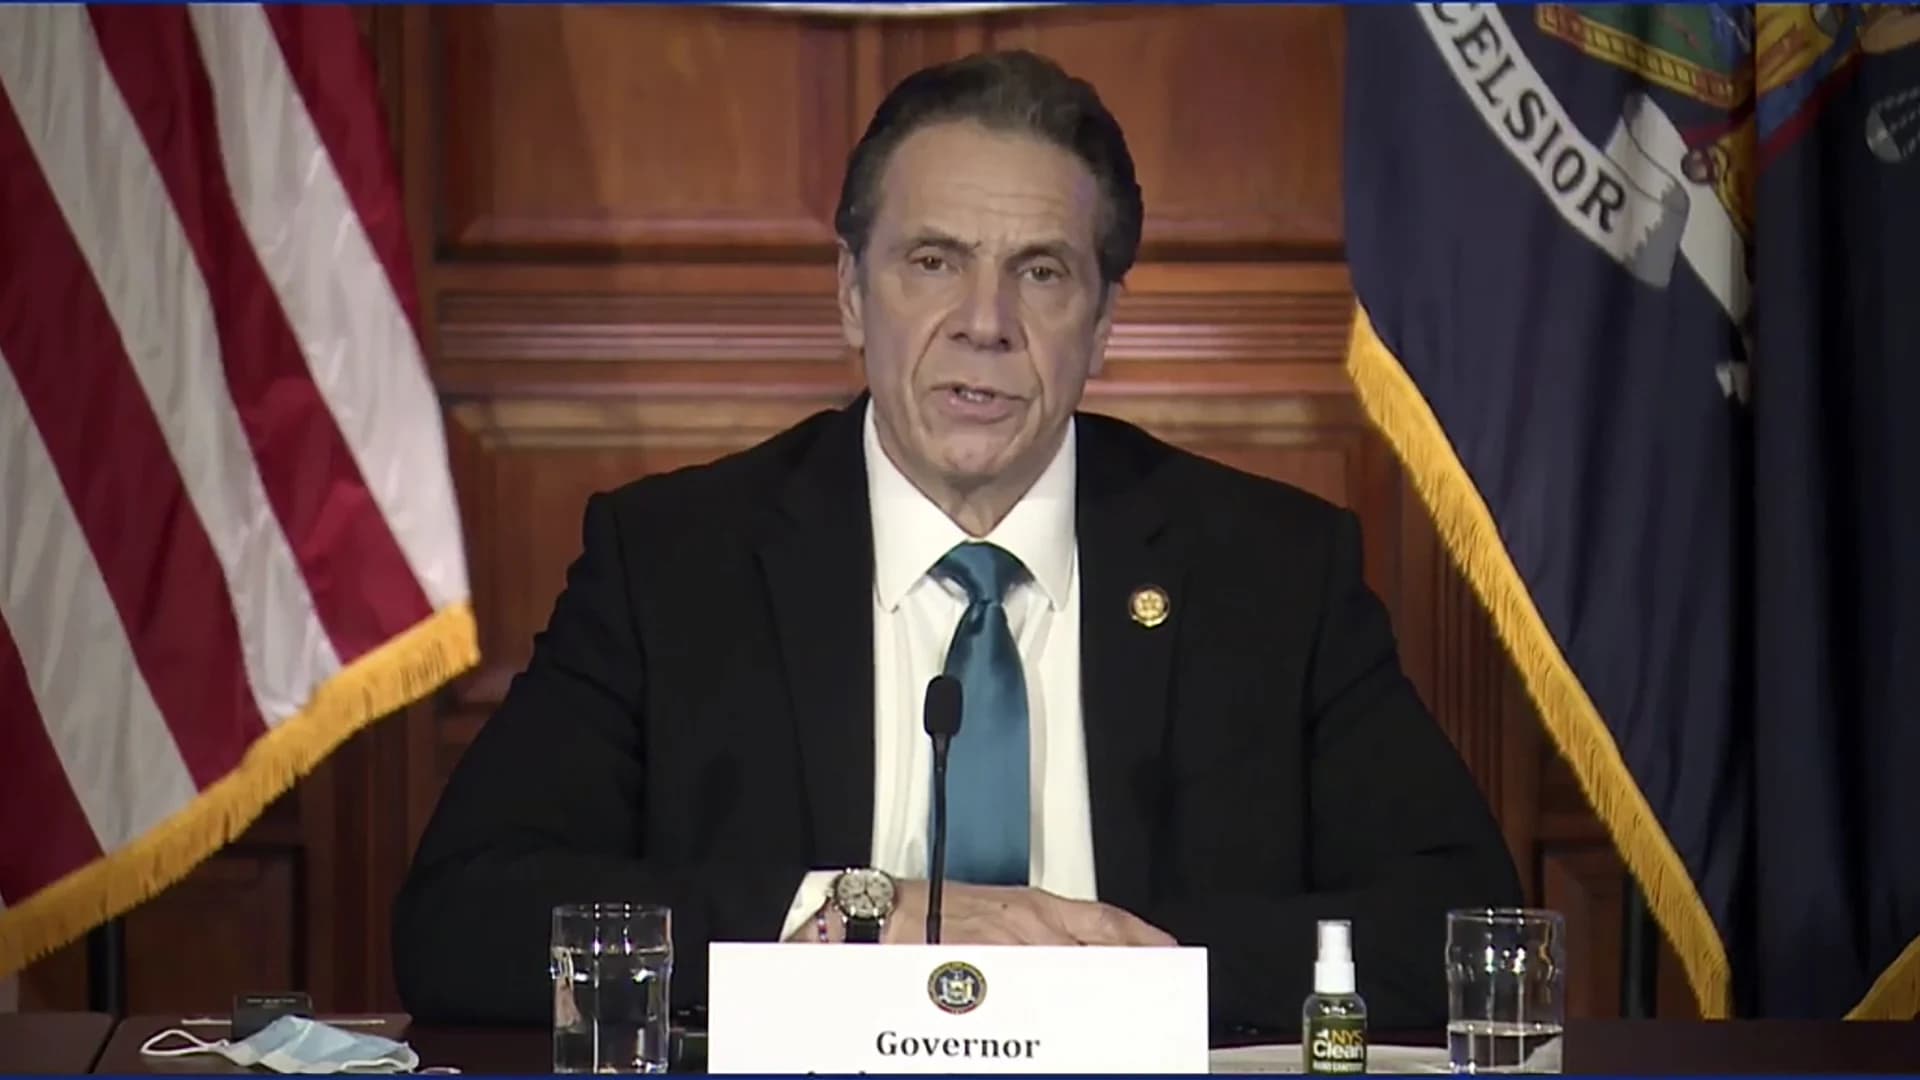 Lawmakers and officials react to harassment allegations against Gov. Cuomo